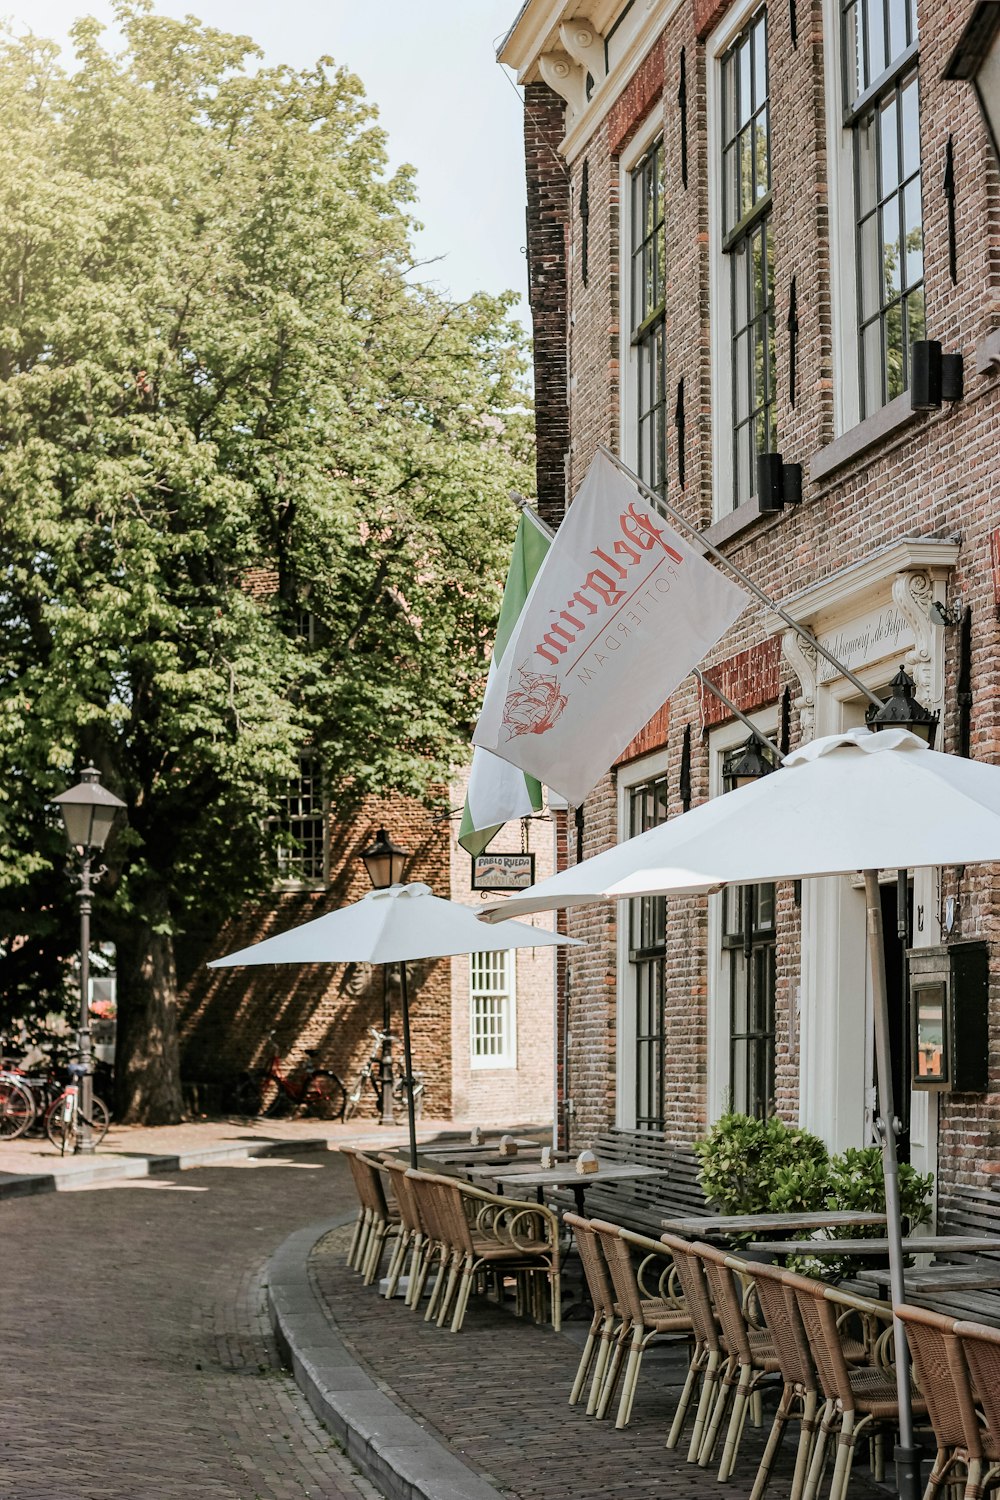 white flag besides bistro chairs during daytime